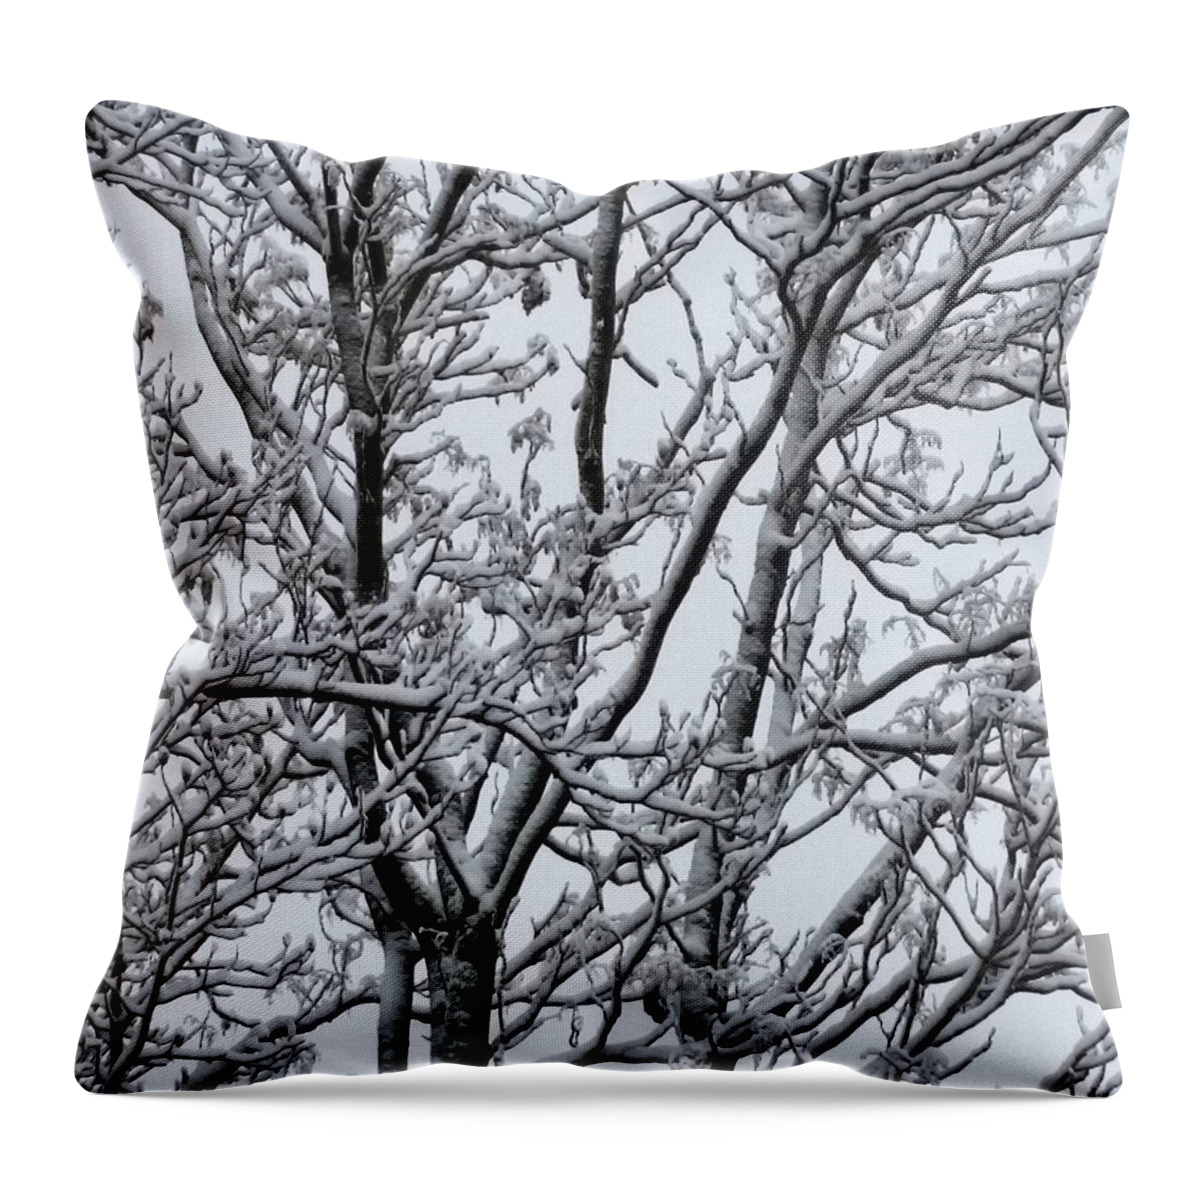 Ice Throw Pillow featuring the photograph Winter Sky through Snow Branches by Vic Ritchey